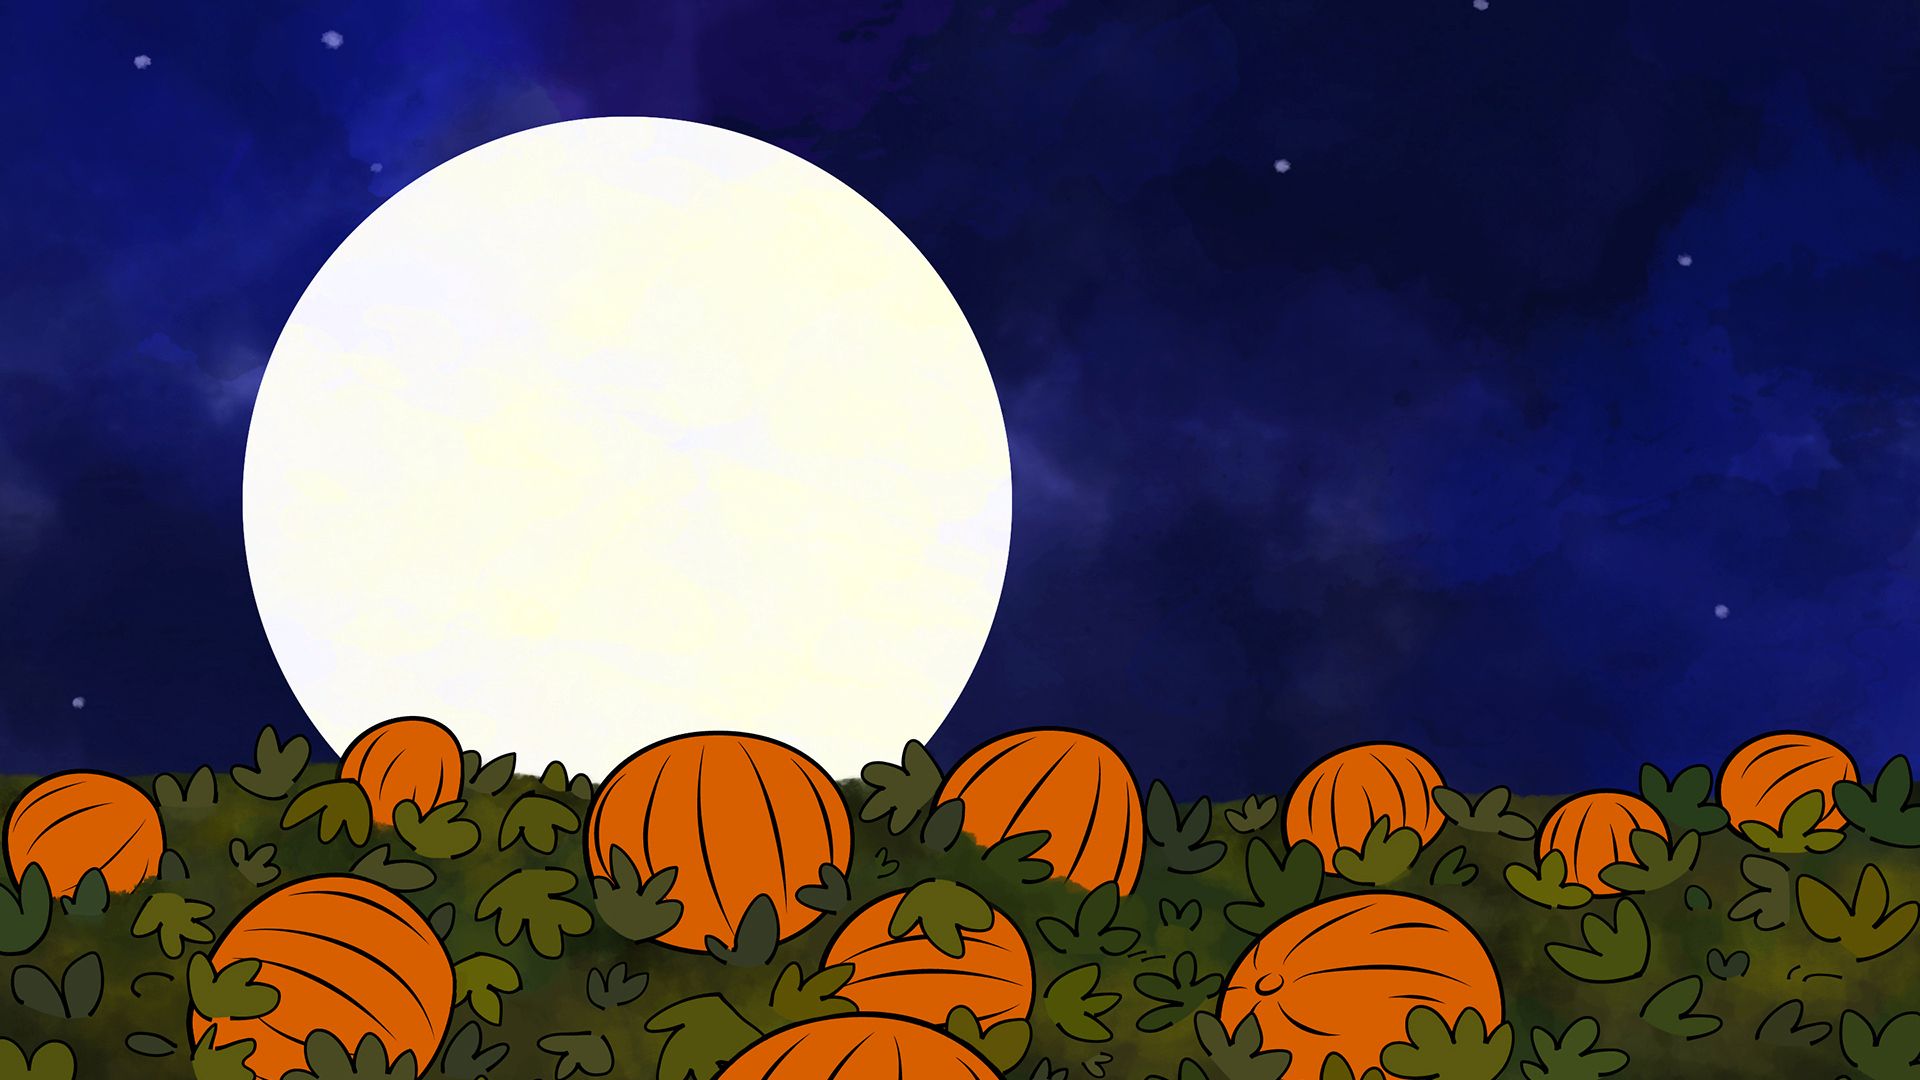 It's the Great Pumpkin, Charlie Brown background